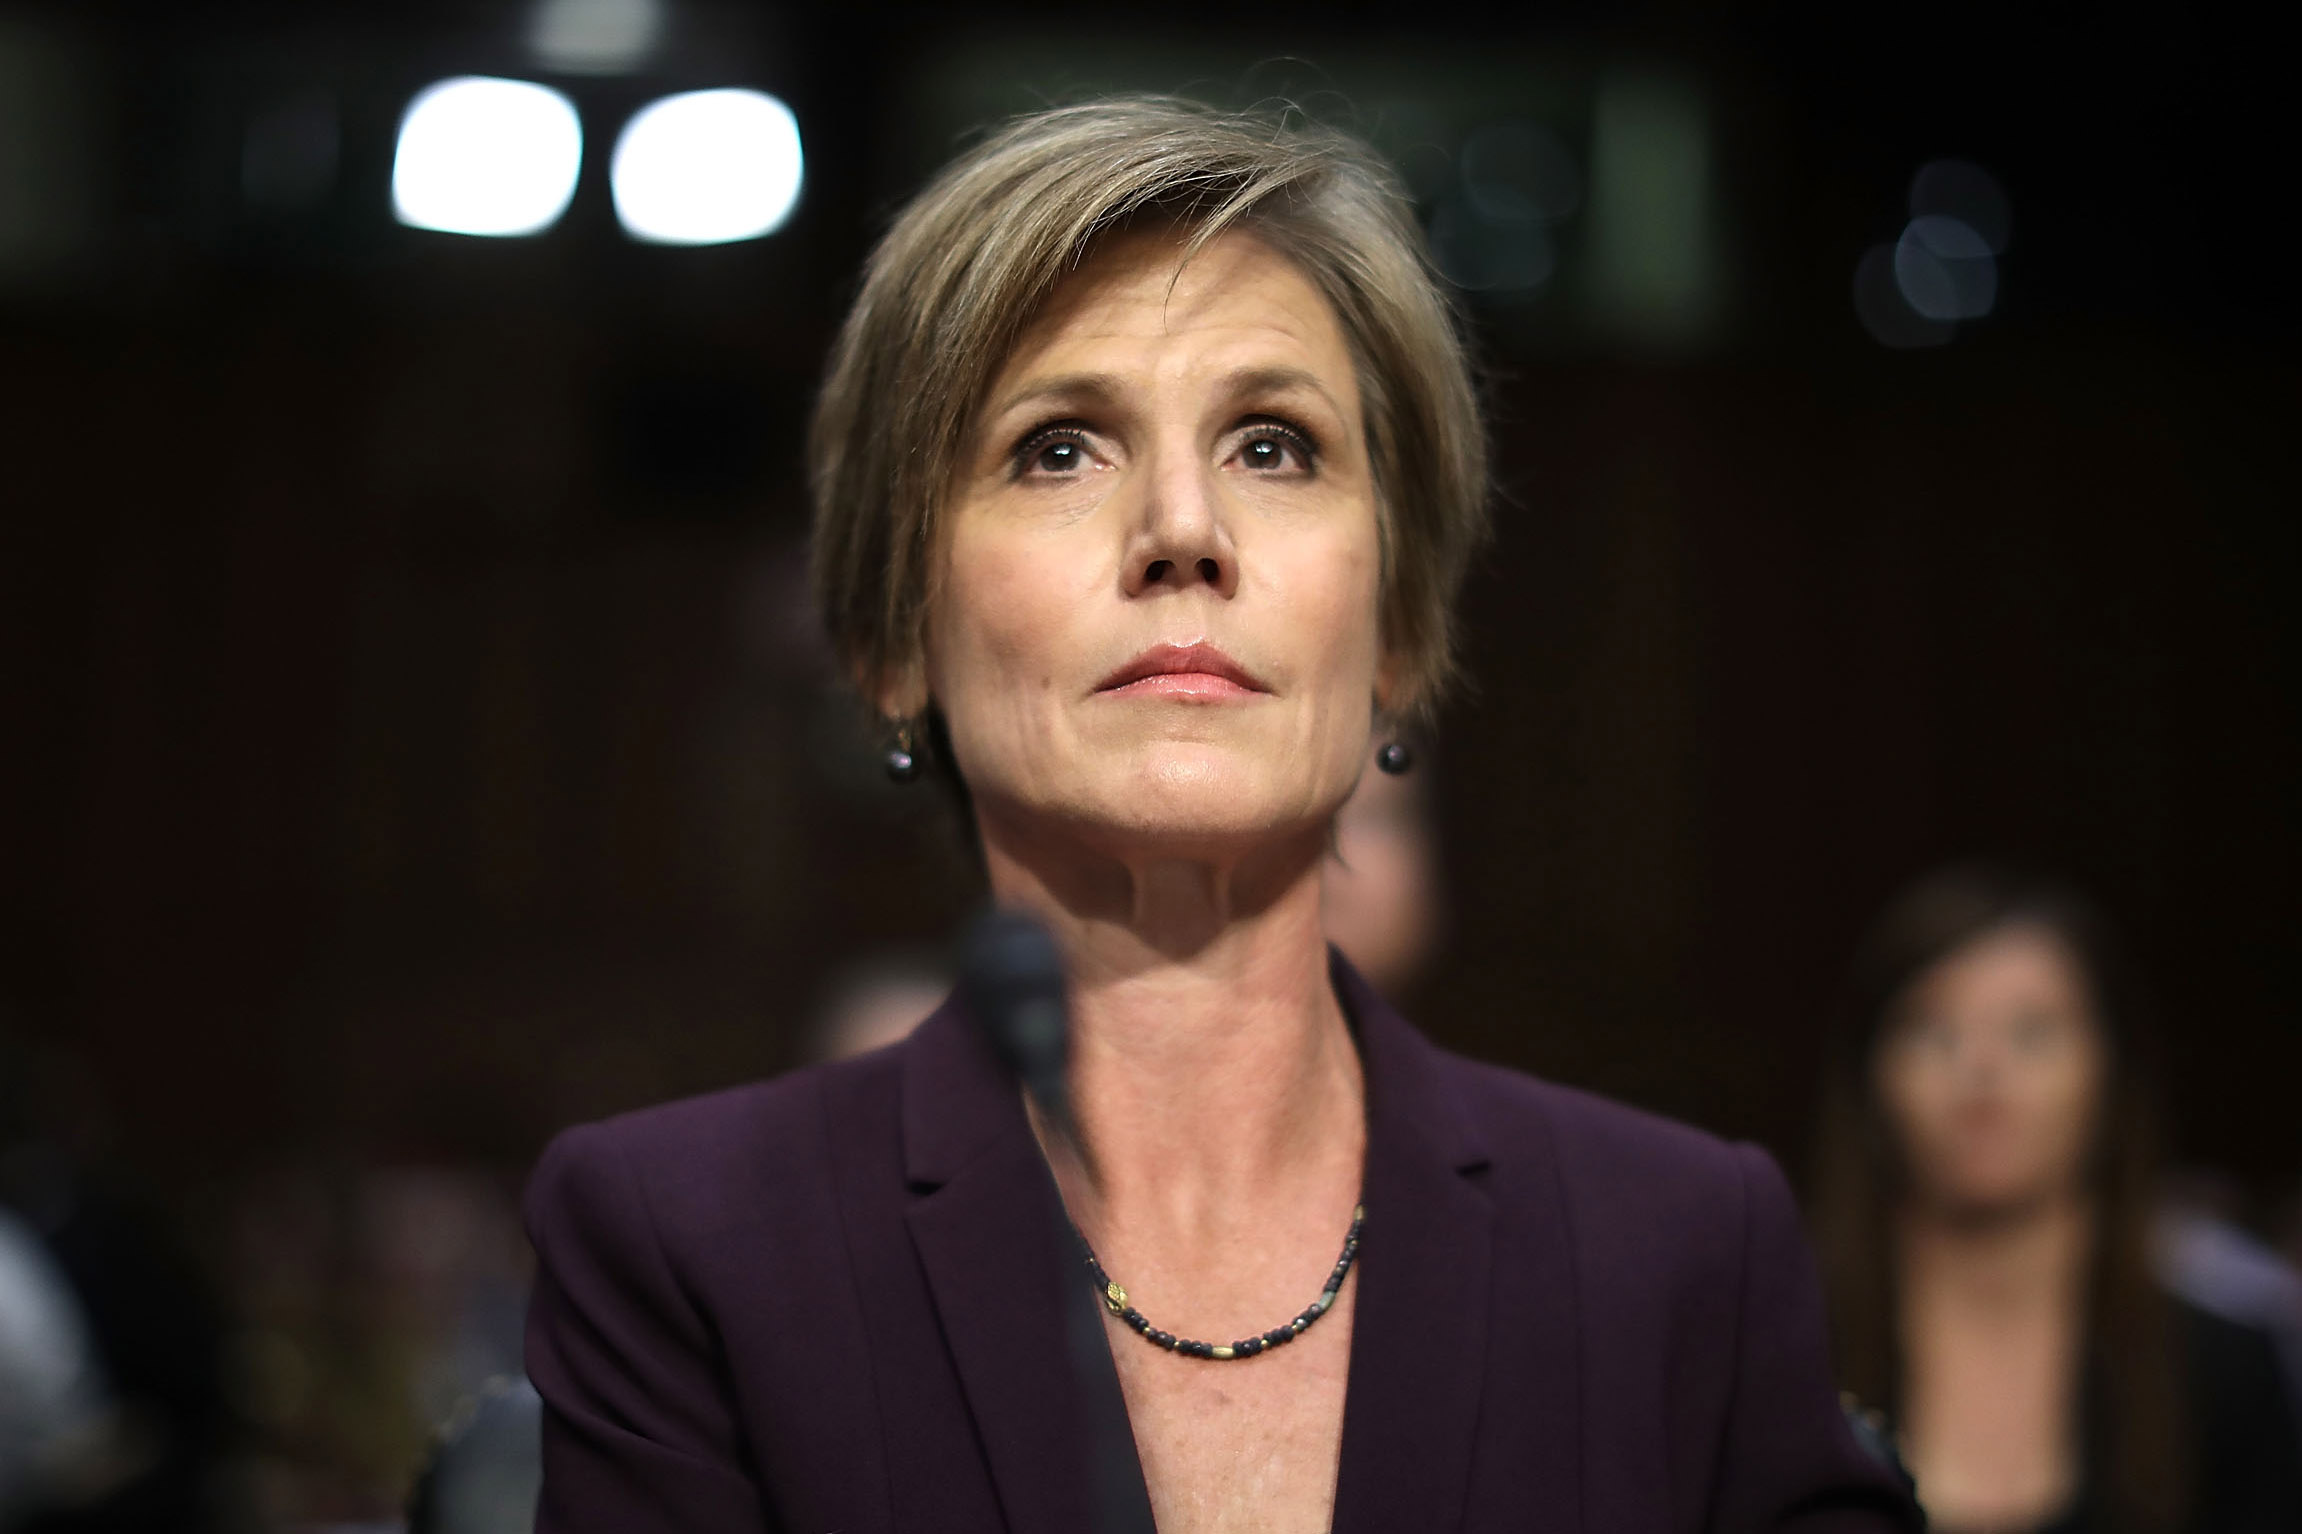 Former acting U.S. Attorney General Sally Yates testifies before the Senate Judiciary Committee's Subcommittee on Crime and Terrorism in the Hart Senate Office Building on Capitol Hill May 8, 2017 in Washington, DC. (Chip Somodevilla, Getty Images)